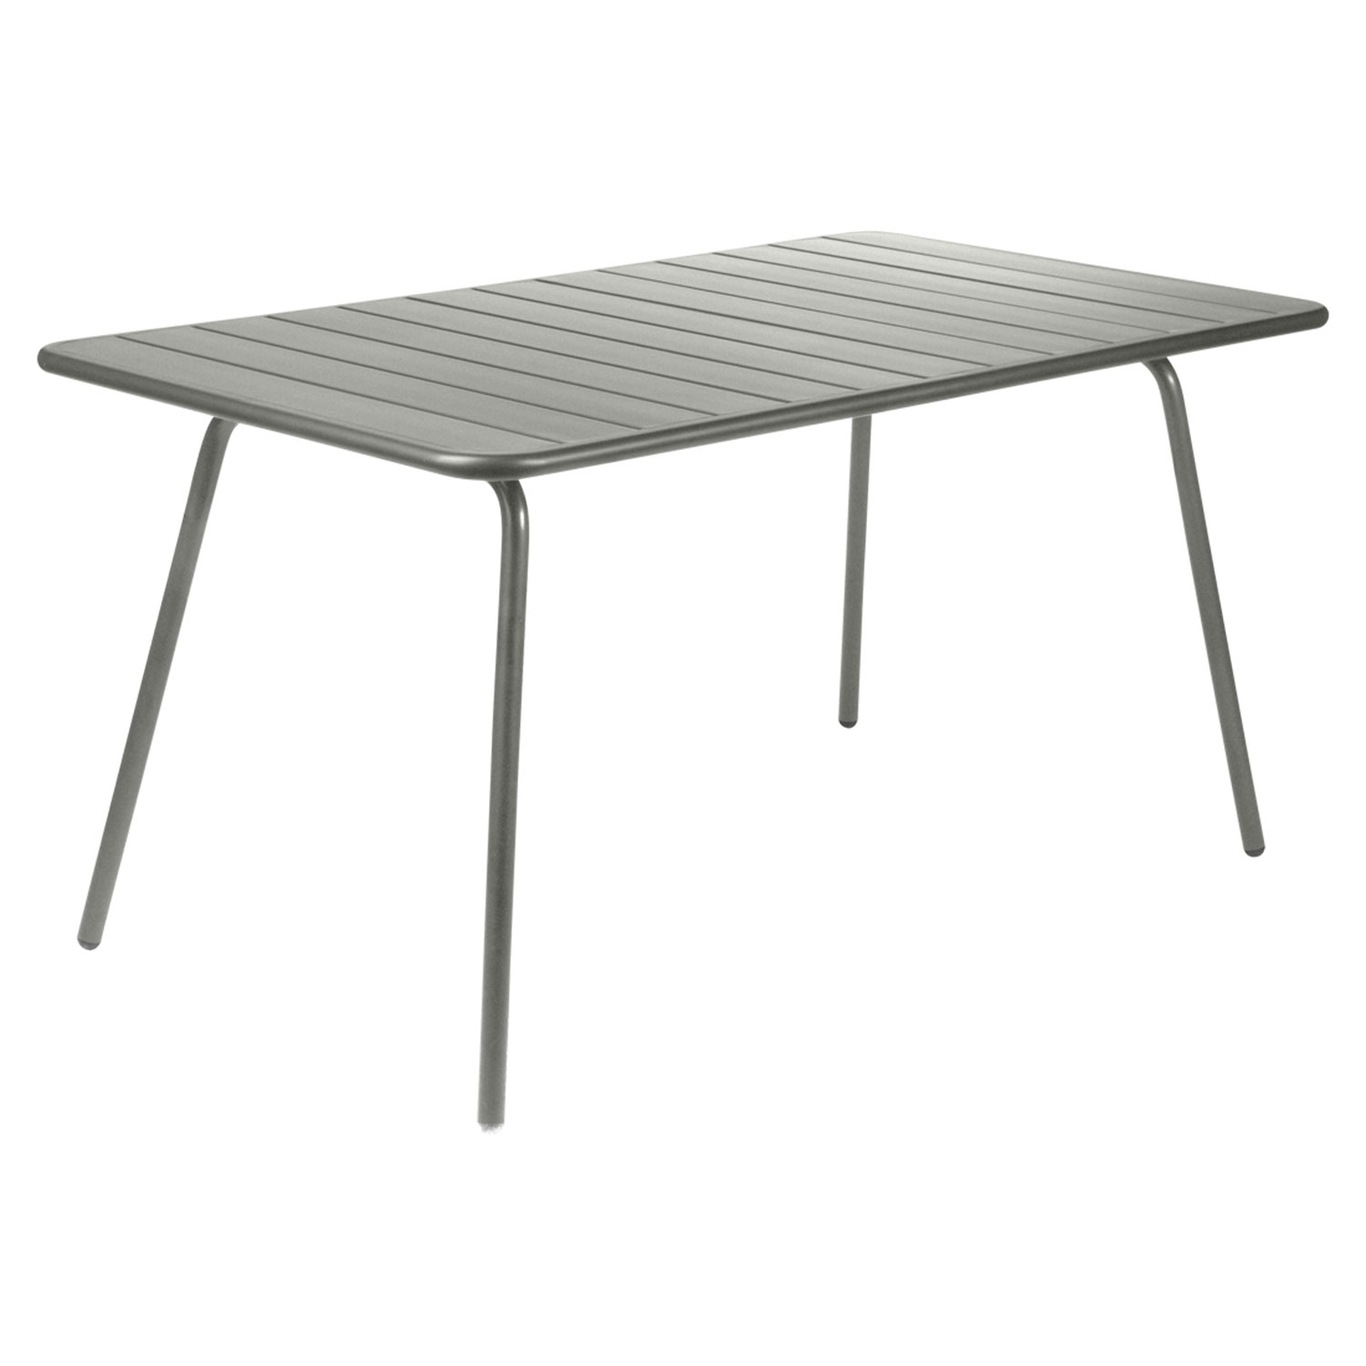 Luxembourg Table 143x80, Rosemary